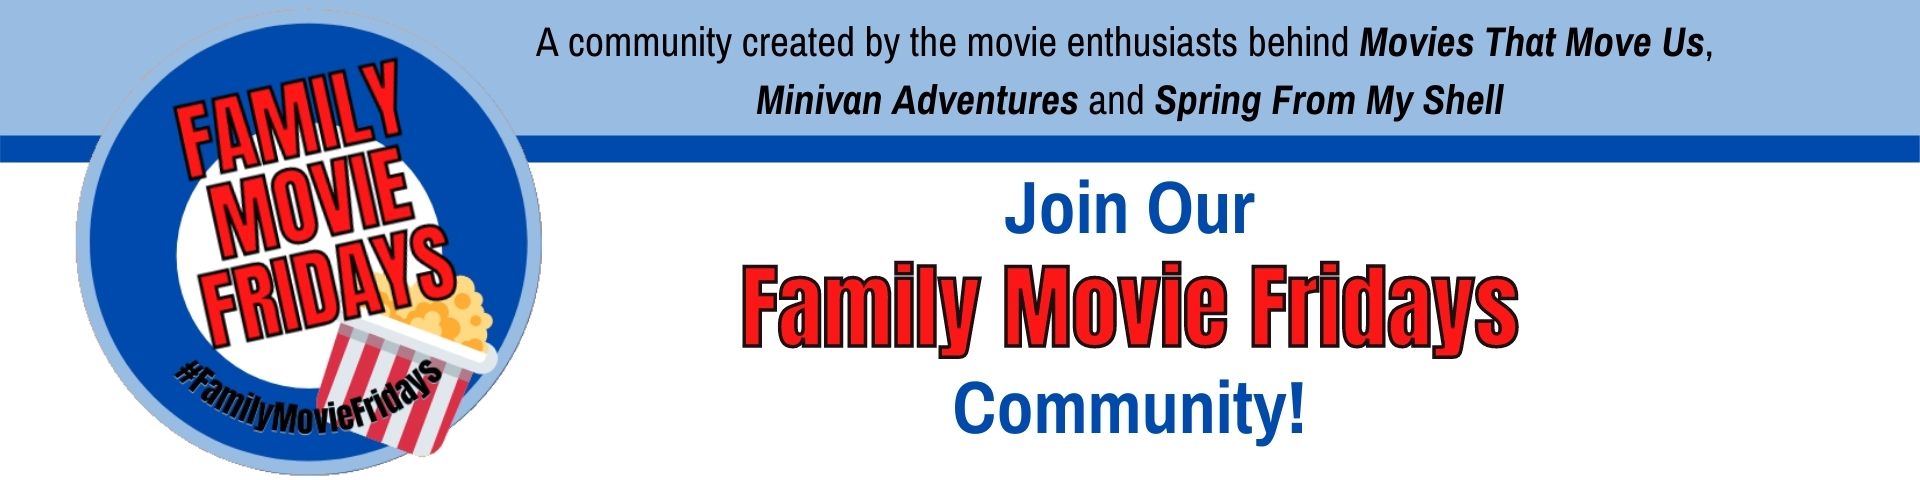 Family Movie Fridays - A community hosted by Minivan Adventures, Movies That Move Us, and Spring From My Shell